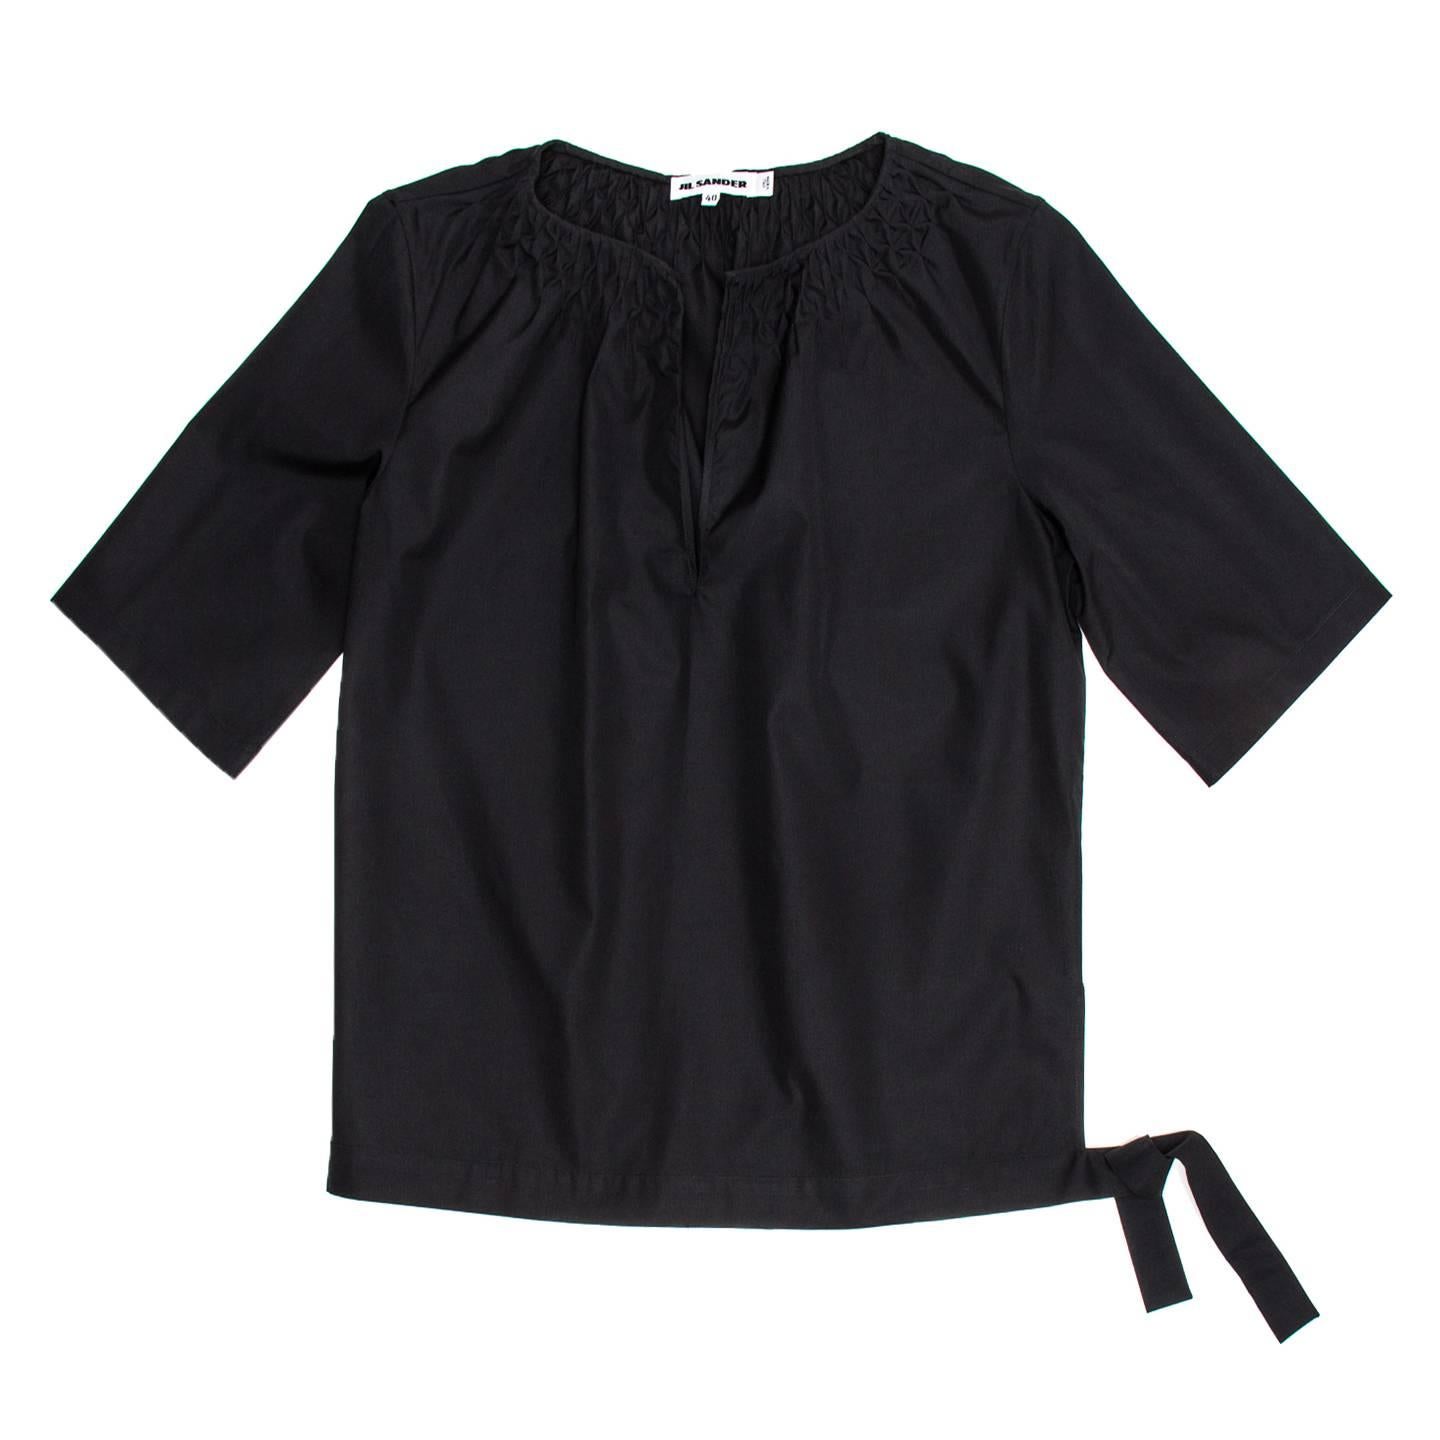 Black cotton tunic top with round collar and straight sleeves short to the elbow. The neckline opens at center front and is embellished by invisible tacks that create a geometric design at front and back, while a waistband fastens on a side with a